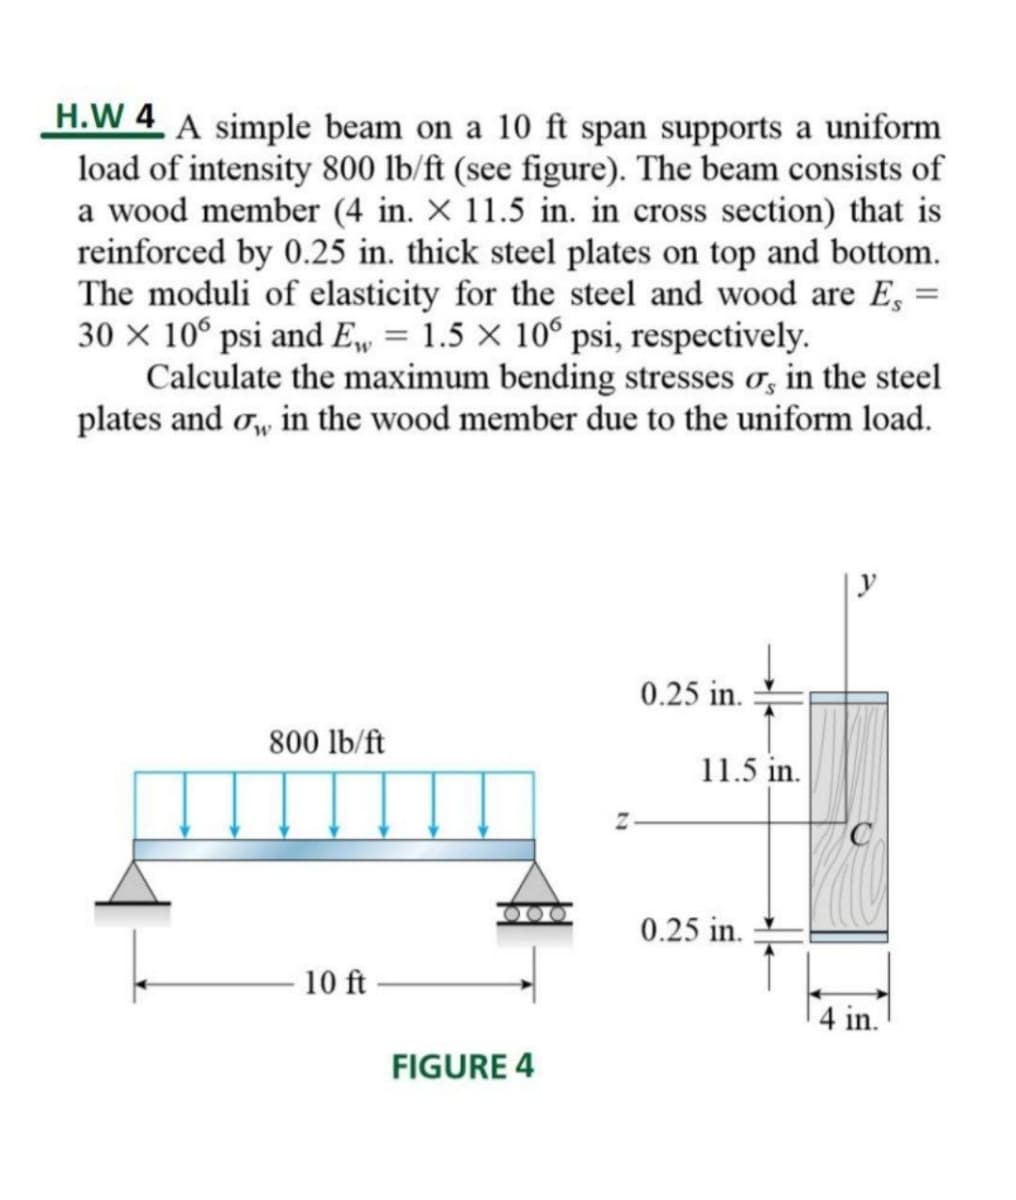 H.W 4 A simple beam on a 10 ft span supports a uniform
load of intensity 800 lb/ft (see figure). The beam consists of
a wood member (4 in. x 11.5 in. in cross section) that is
reinforced by 0.25 in. thick steel plates on top and bottom.
The moduli of elasticity for the steel and wood are Es
30 x 10° psi and E, = 1.5 x 106 psi, respectively.
Calculate the maximum bending stresses o, in the steel
plates and or, in the wood member due to the uniform load.
0.25 in.
800 lb/ft
10 ft
FIGURE 4
11.5 in.
0.25 in.
4 in.